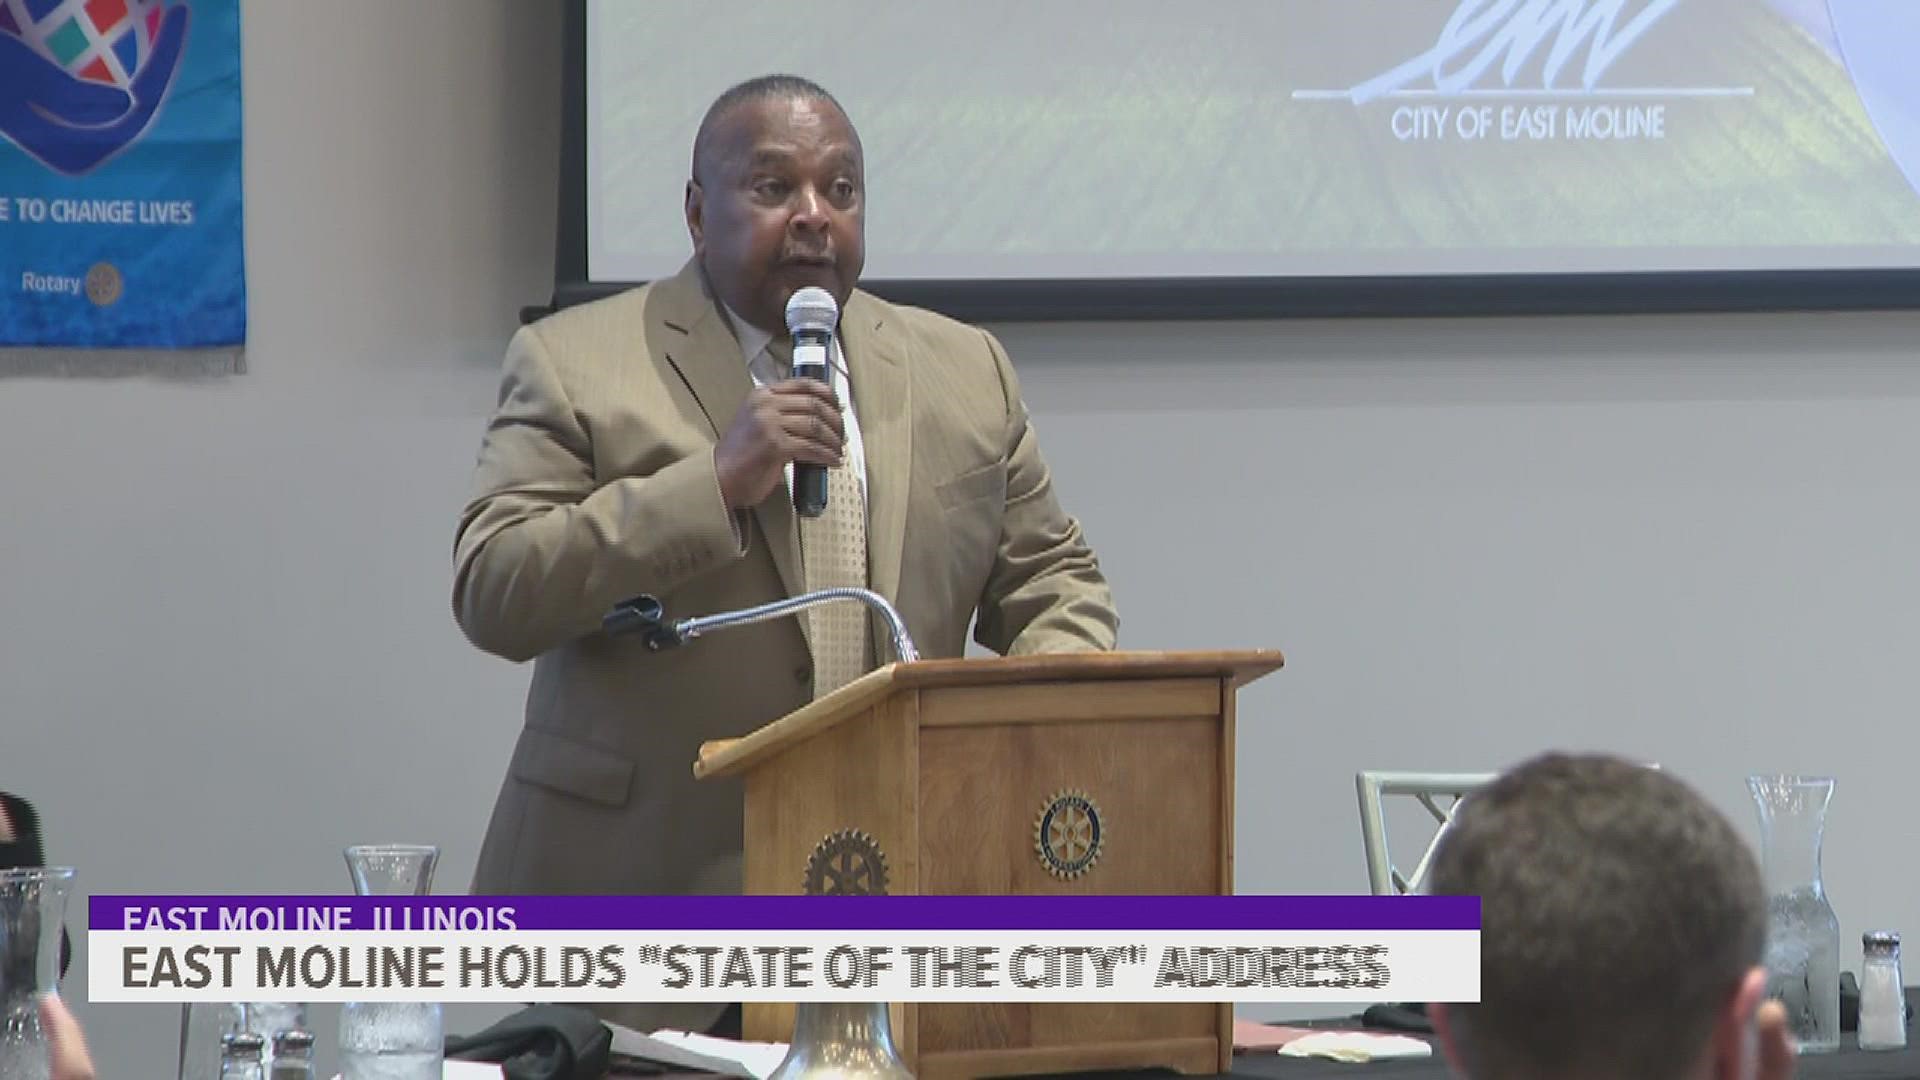 The new hotel was one of the main topics Thursday at Mayor Reggie Freeman's State of the City address.